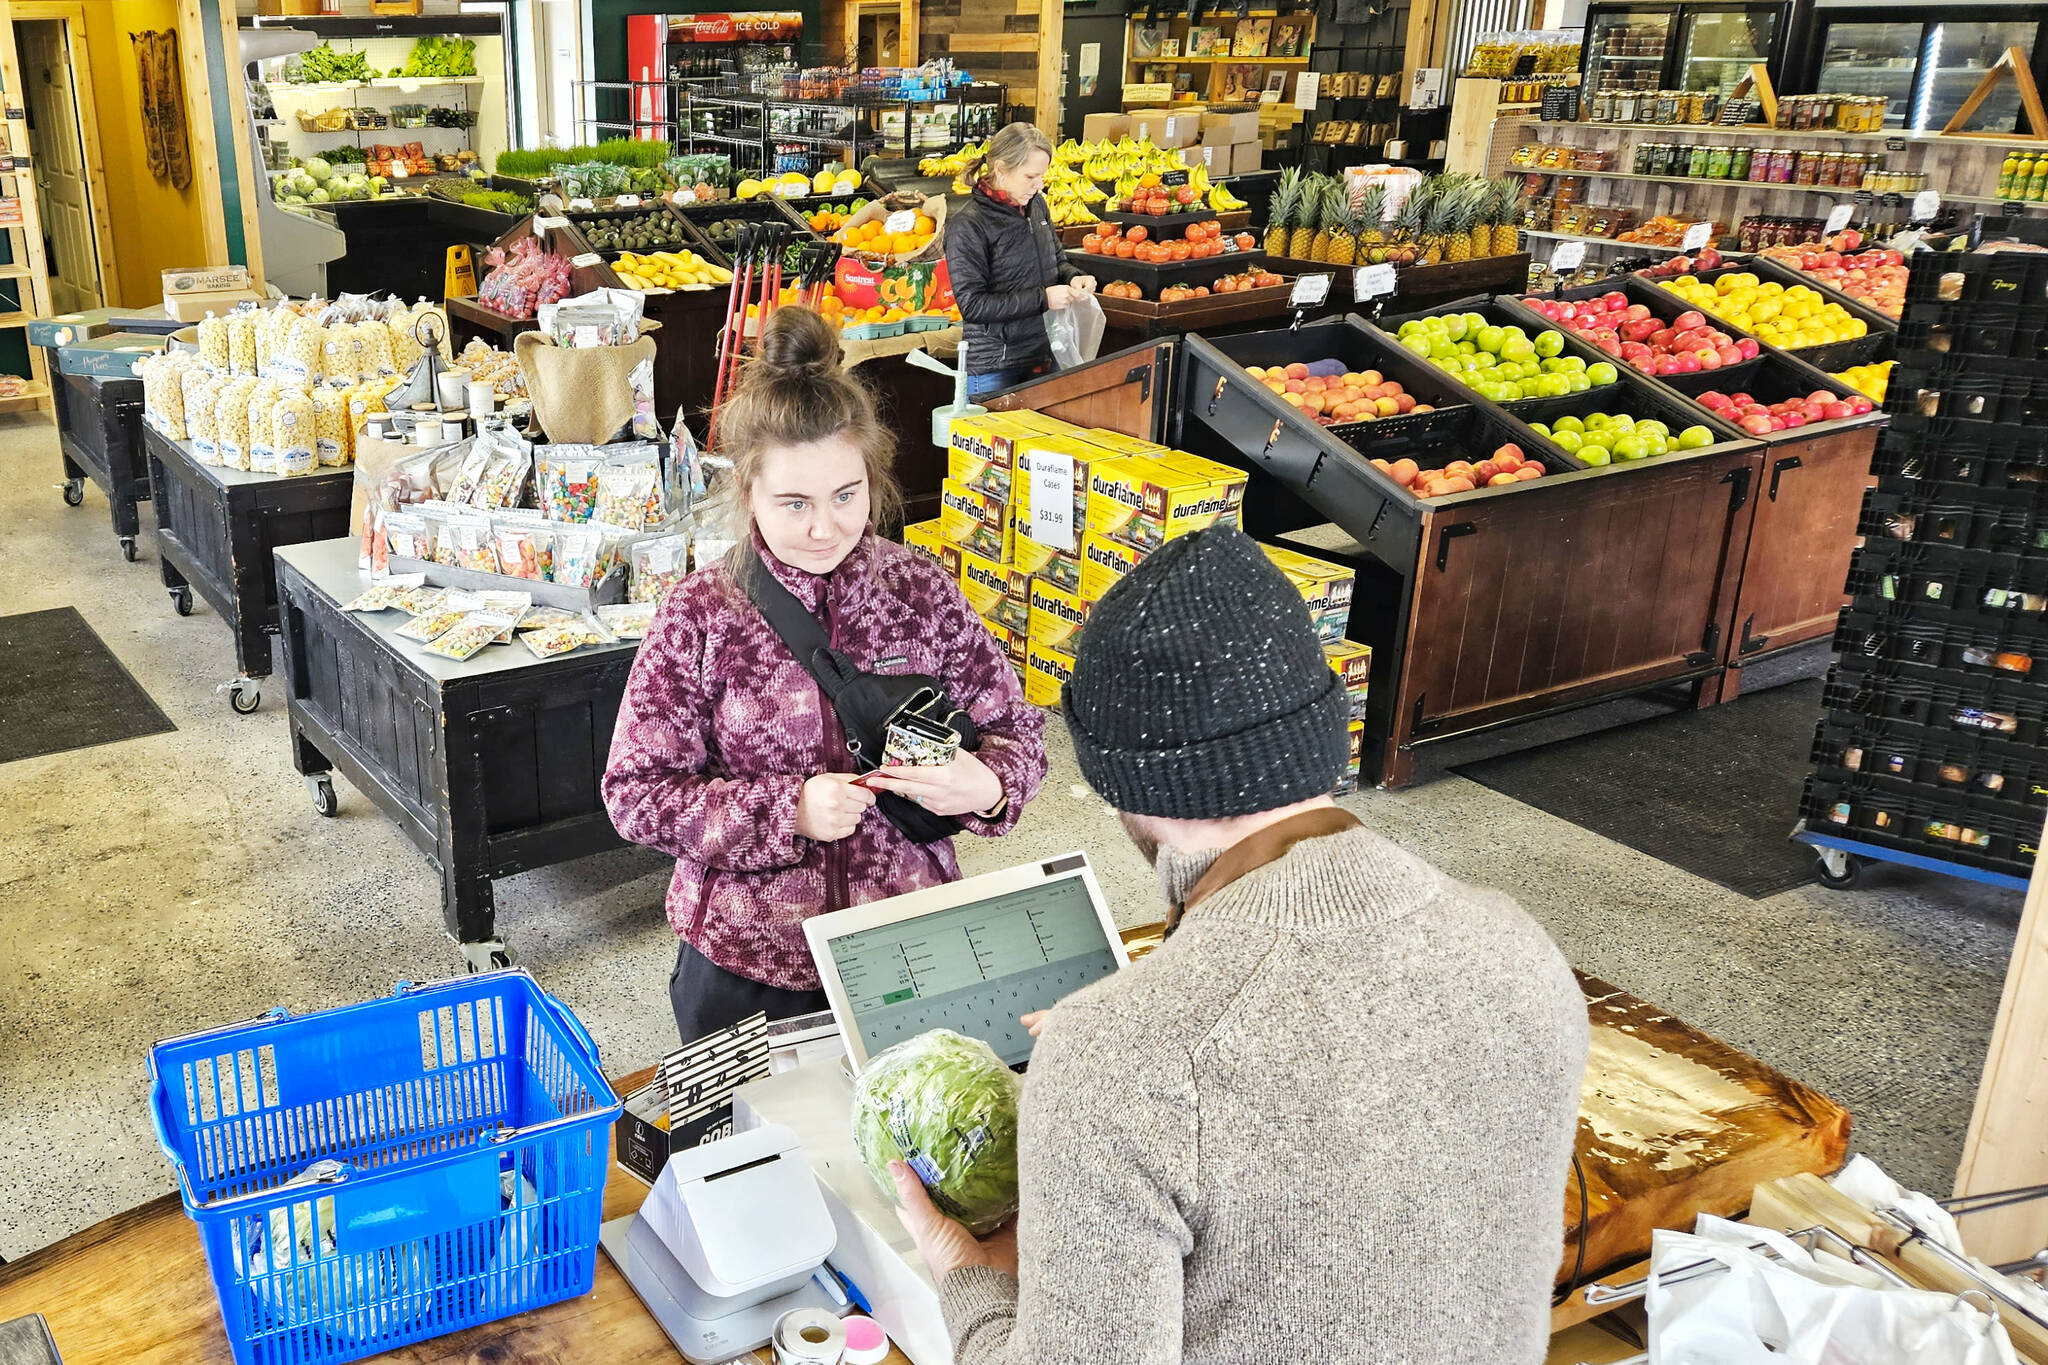 Rainier Fresh Country Store's owner, Patrick Brown, checking out a customer last Friday. Photo by Ray Miller-Still